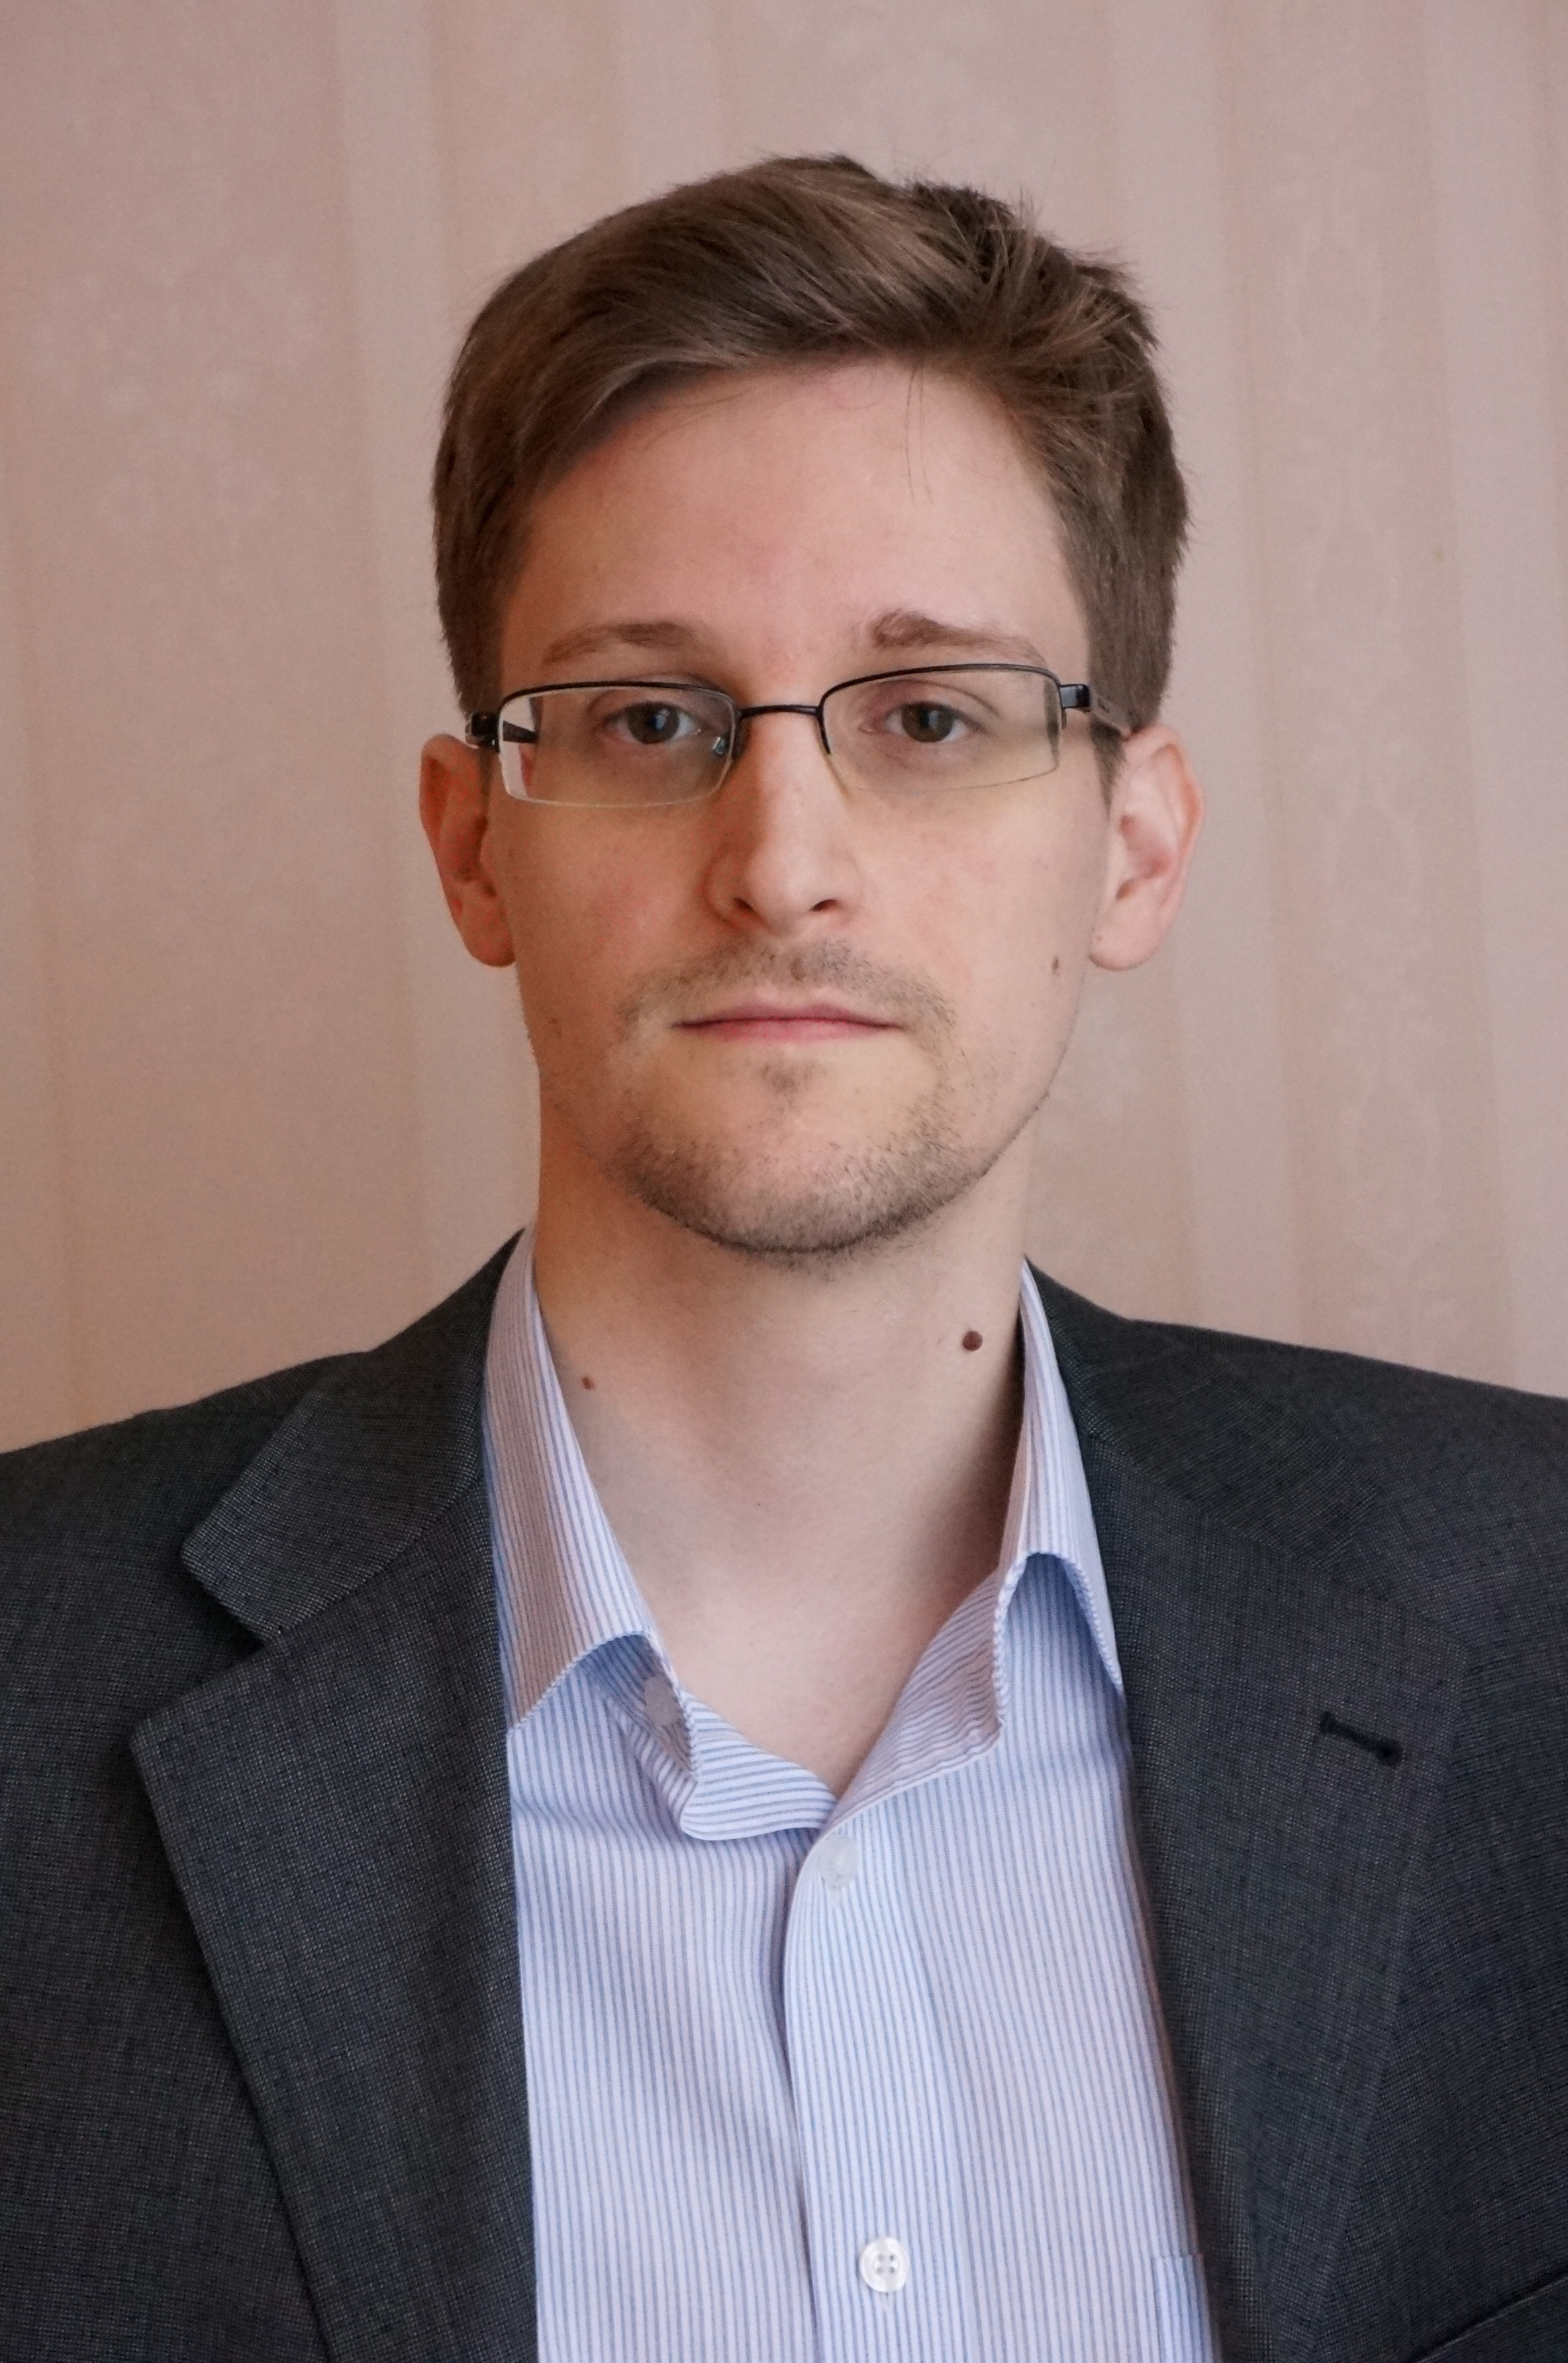 Former intelligence contractor Edward Snowden poses for a photo during an interview in an undisclosed location in December 2013 in Moscow. (Barton Gellman/Getty Images)